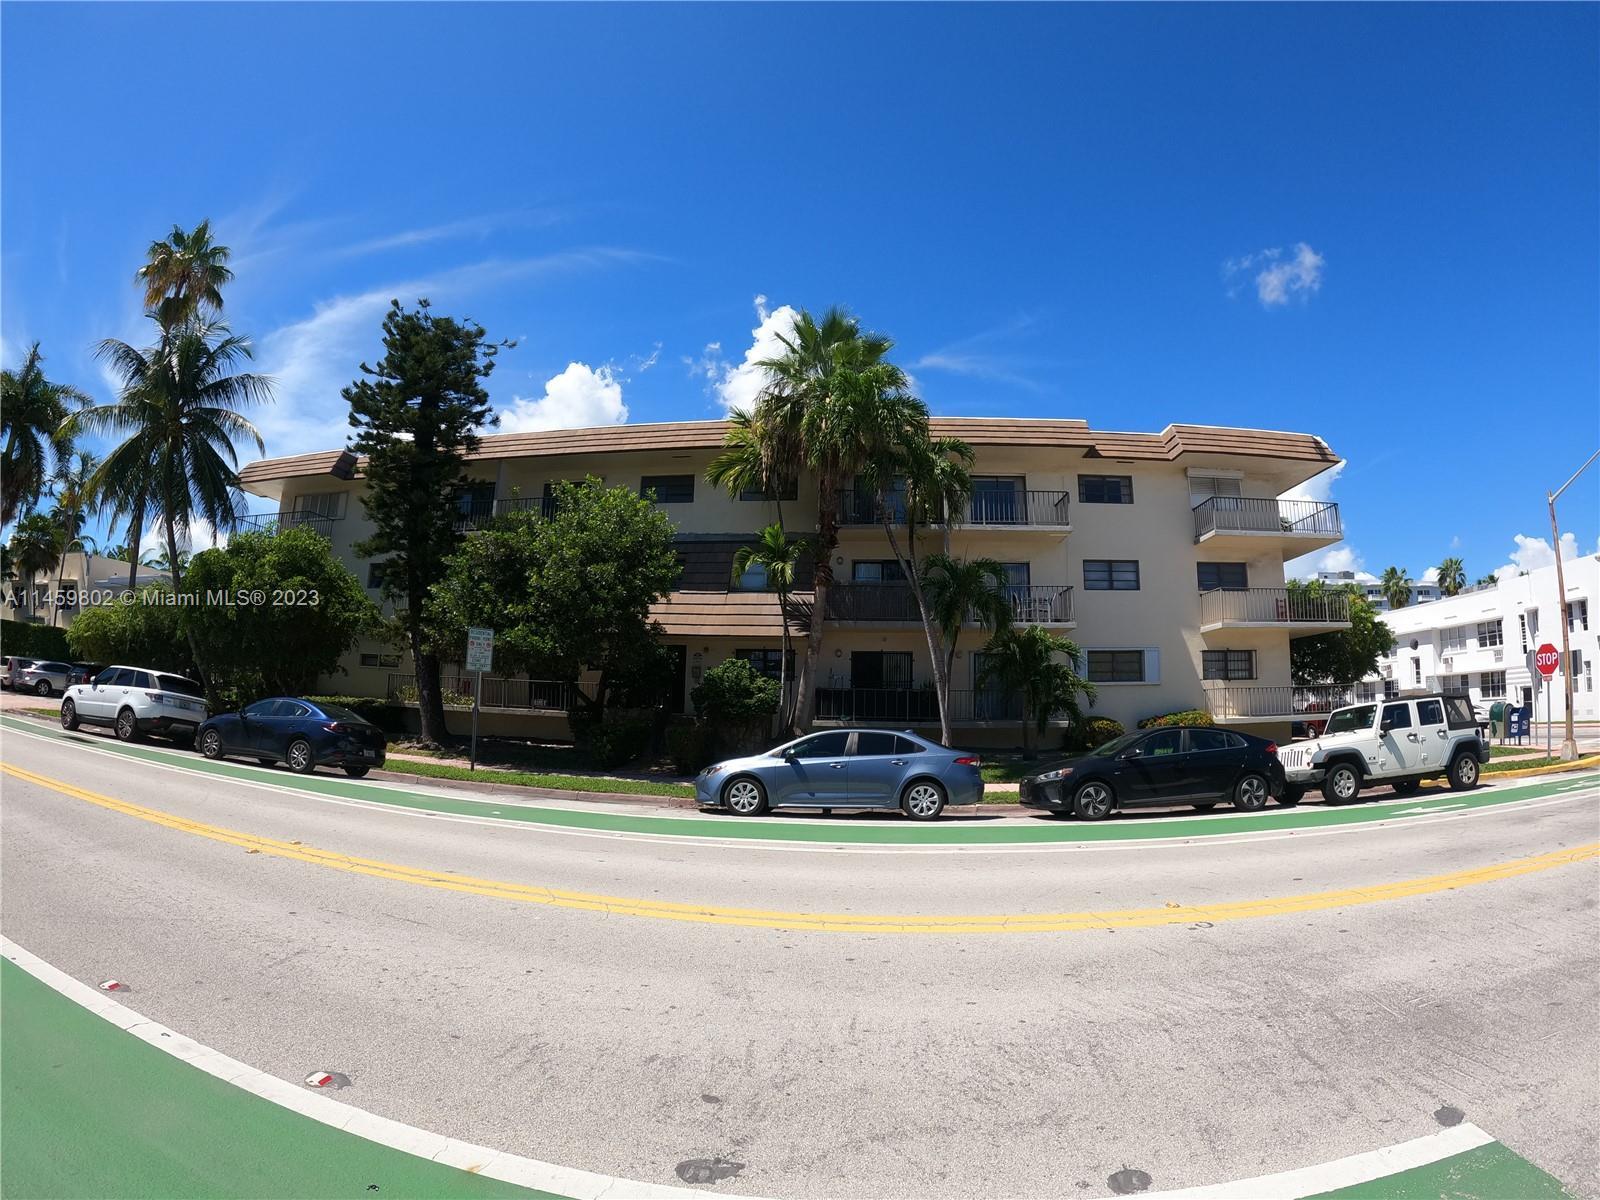 SPACIOUS APARTMENT IN THE HEART OF SOUTH BEACH. 1 BEDROOM, 1.5 BATHROOOM, WASHER & DRYER INSIDE UNIT